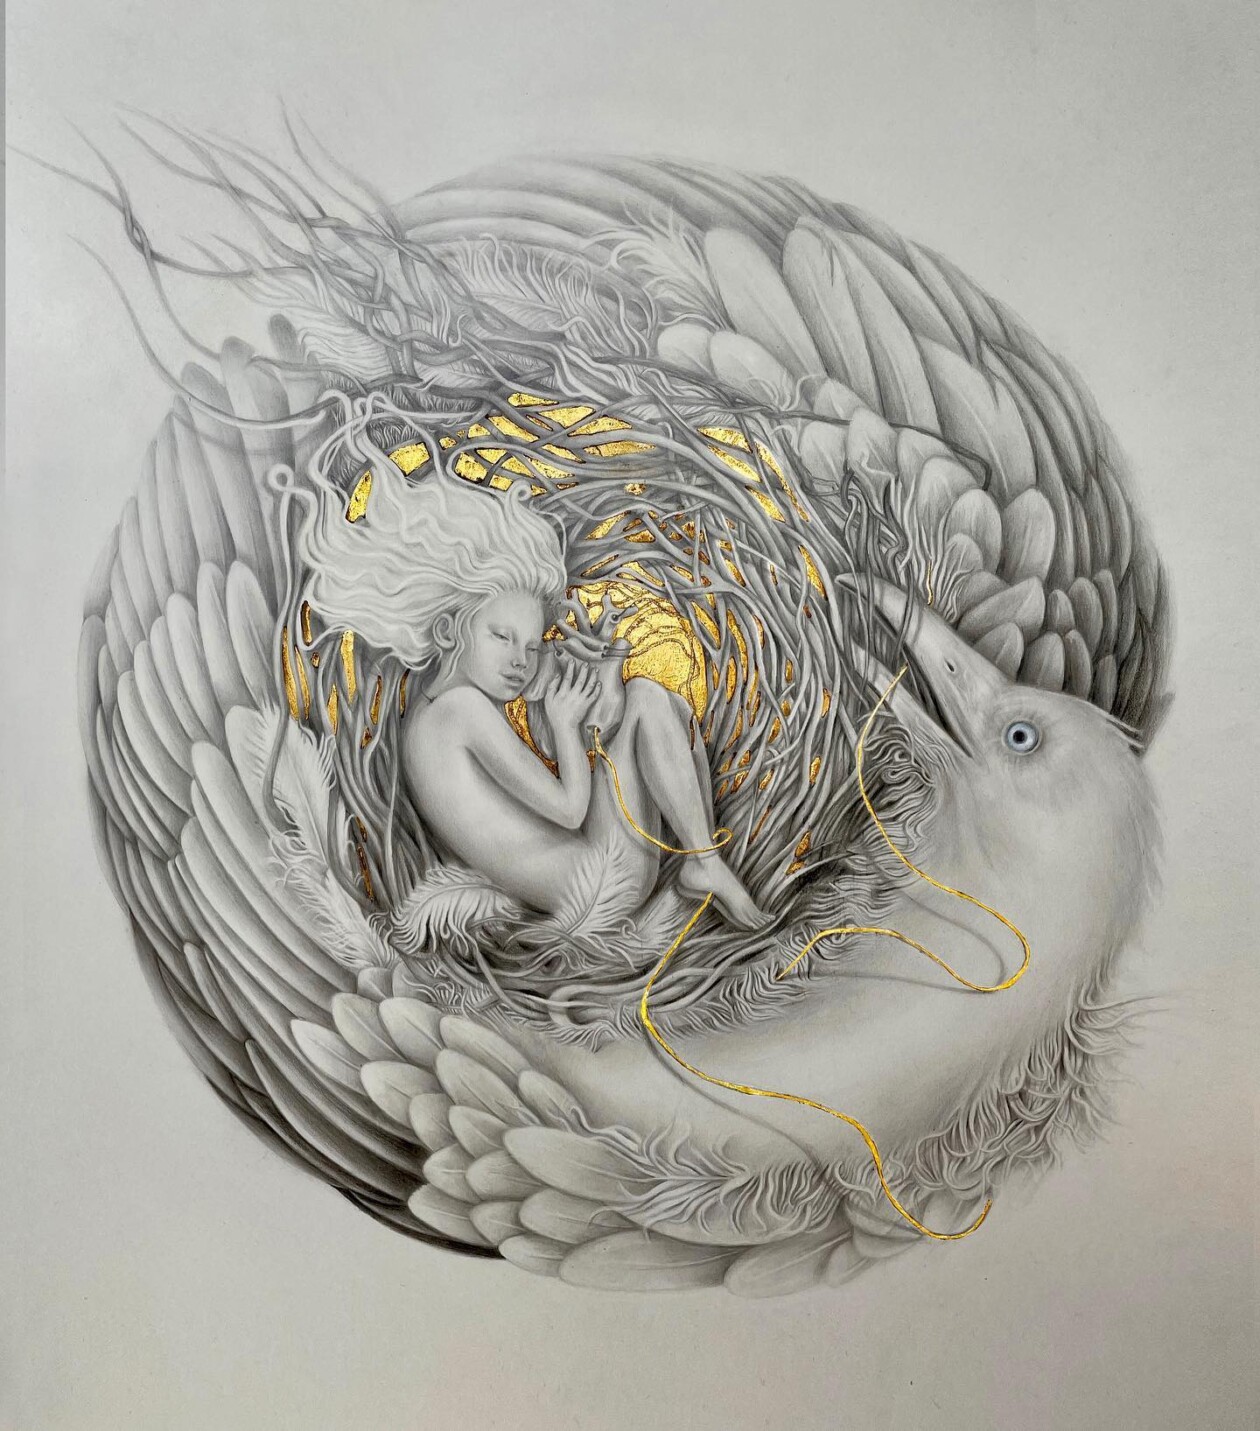 Graphite And Gold Drawings By Iskra Sale (7)